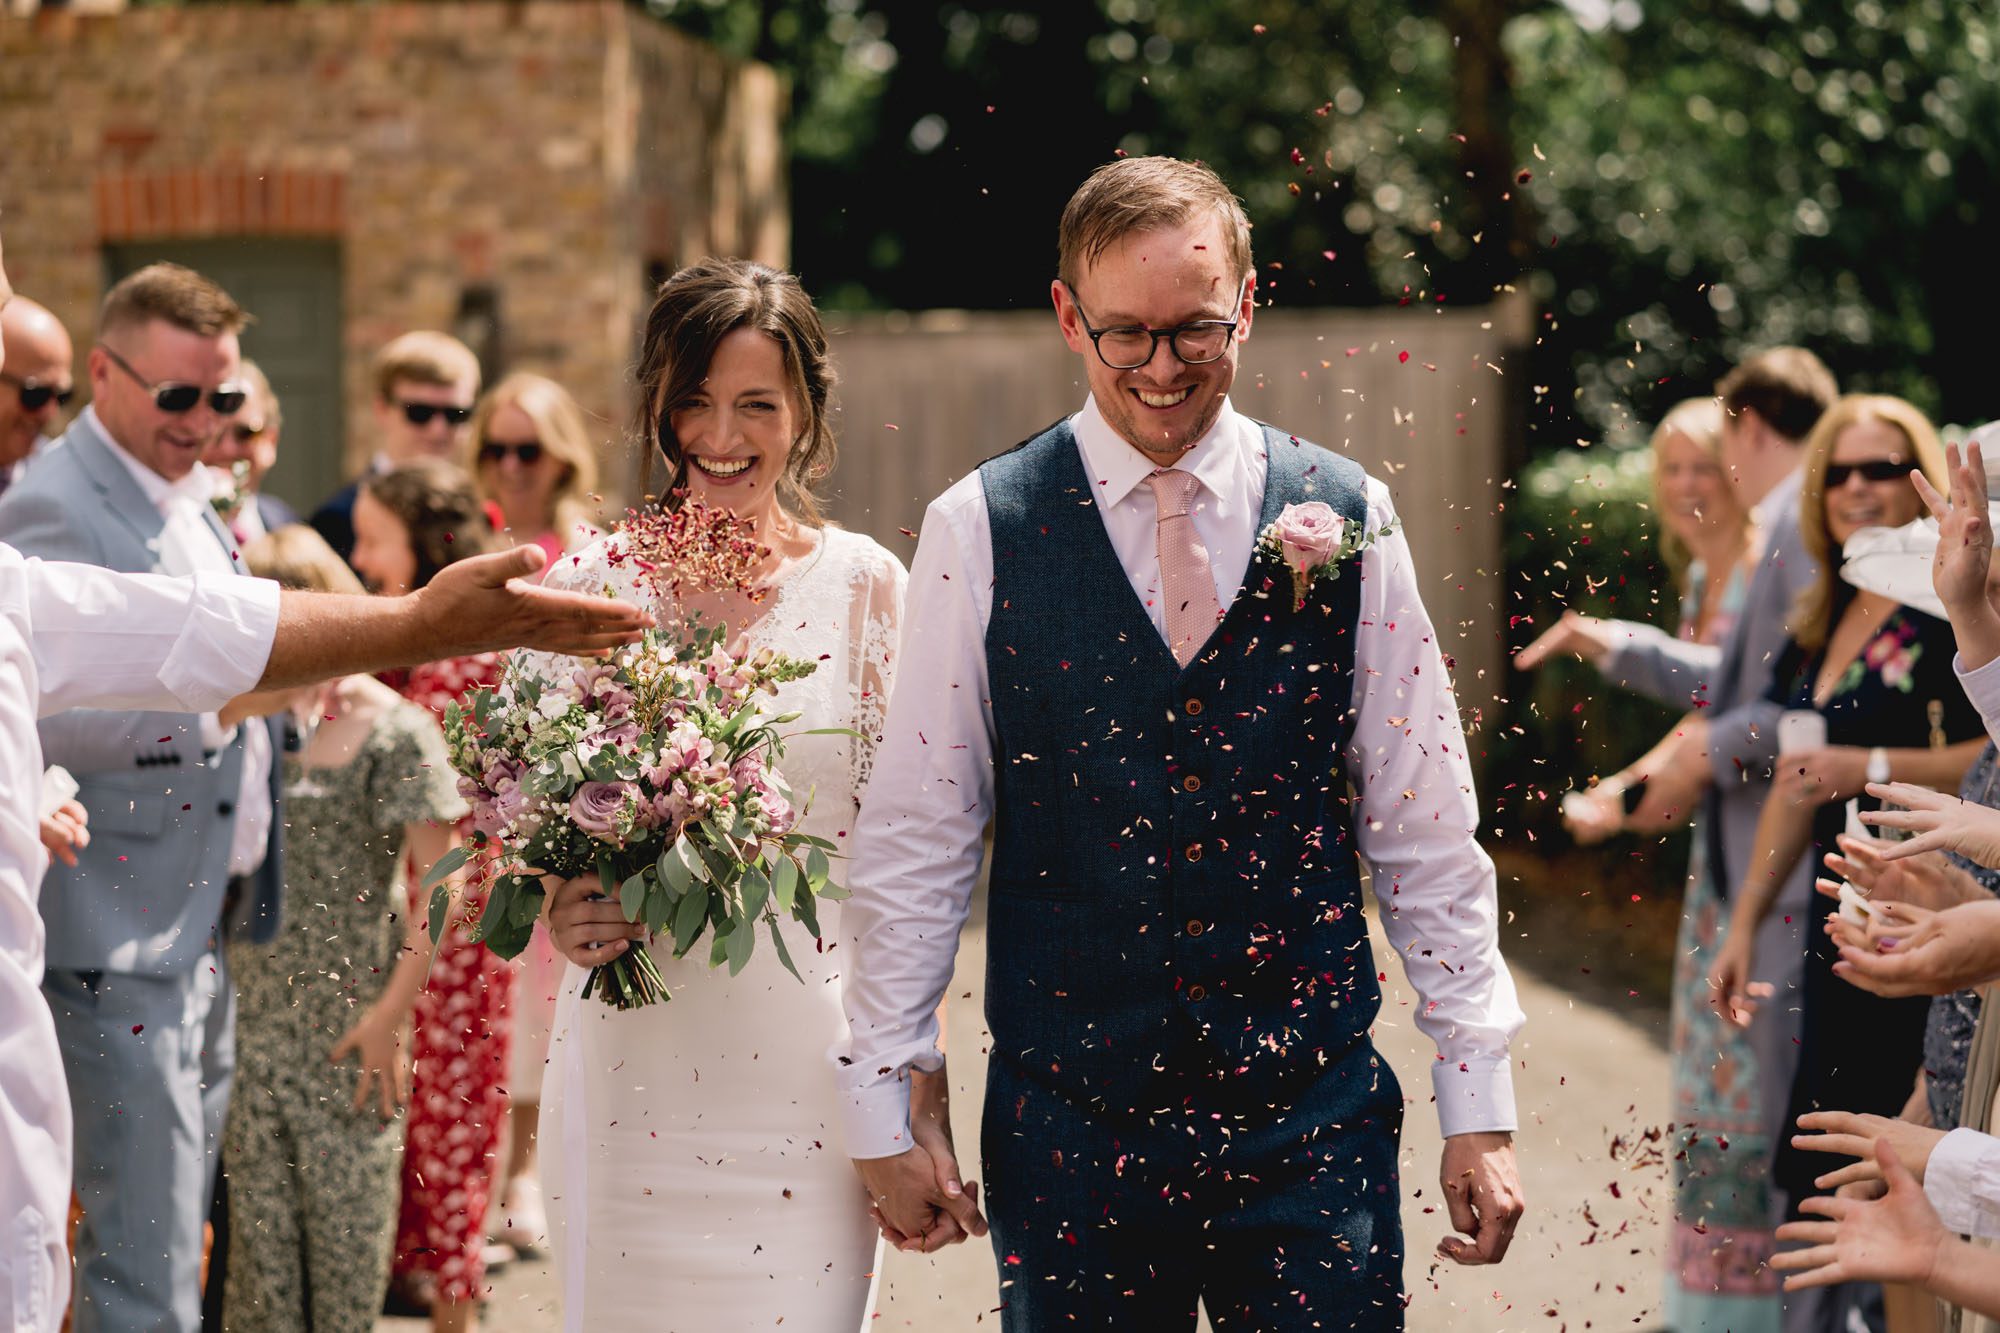 A bride and groom have lots of confetti thrown at them on their wedding day at Dorney Court in Buckinghamshire.